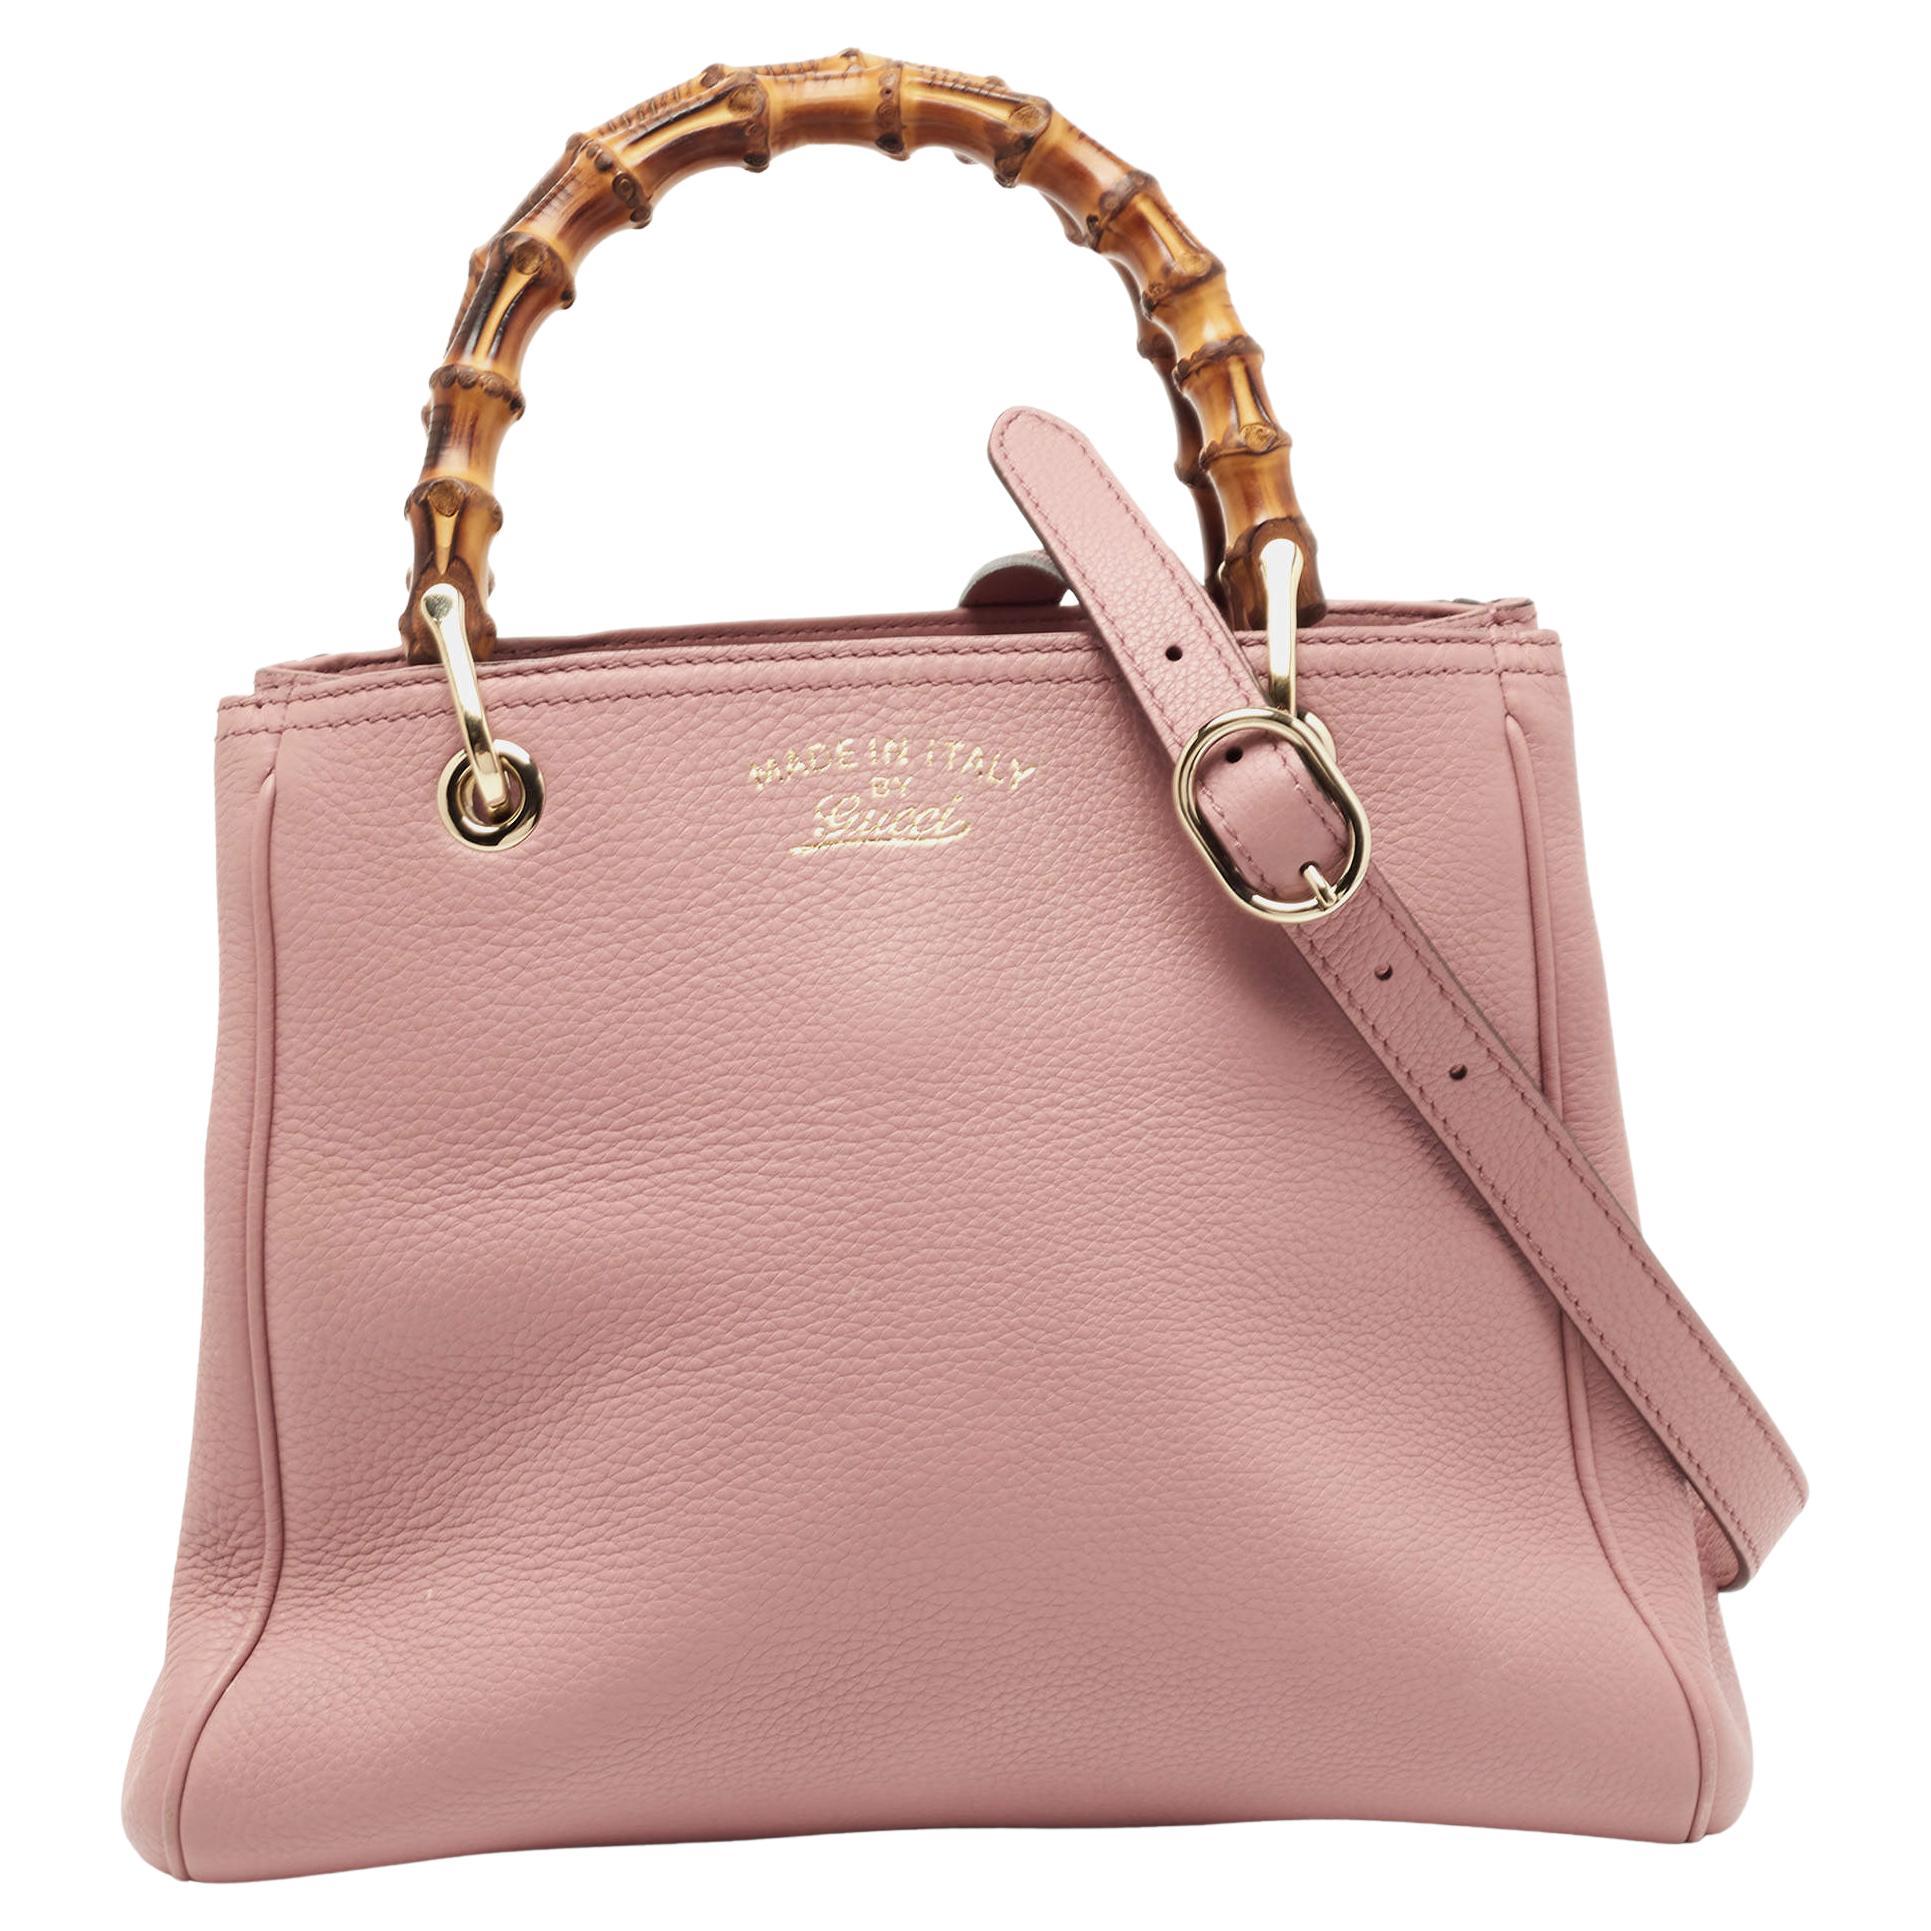 Gucci Old Rose Leather Bamboo Handle Tote